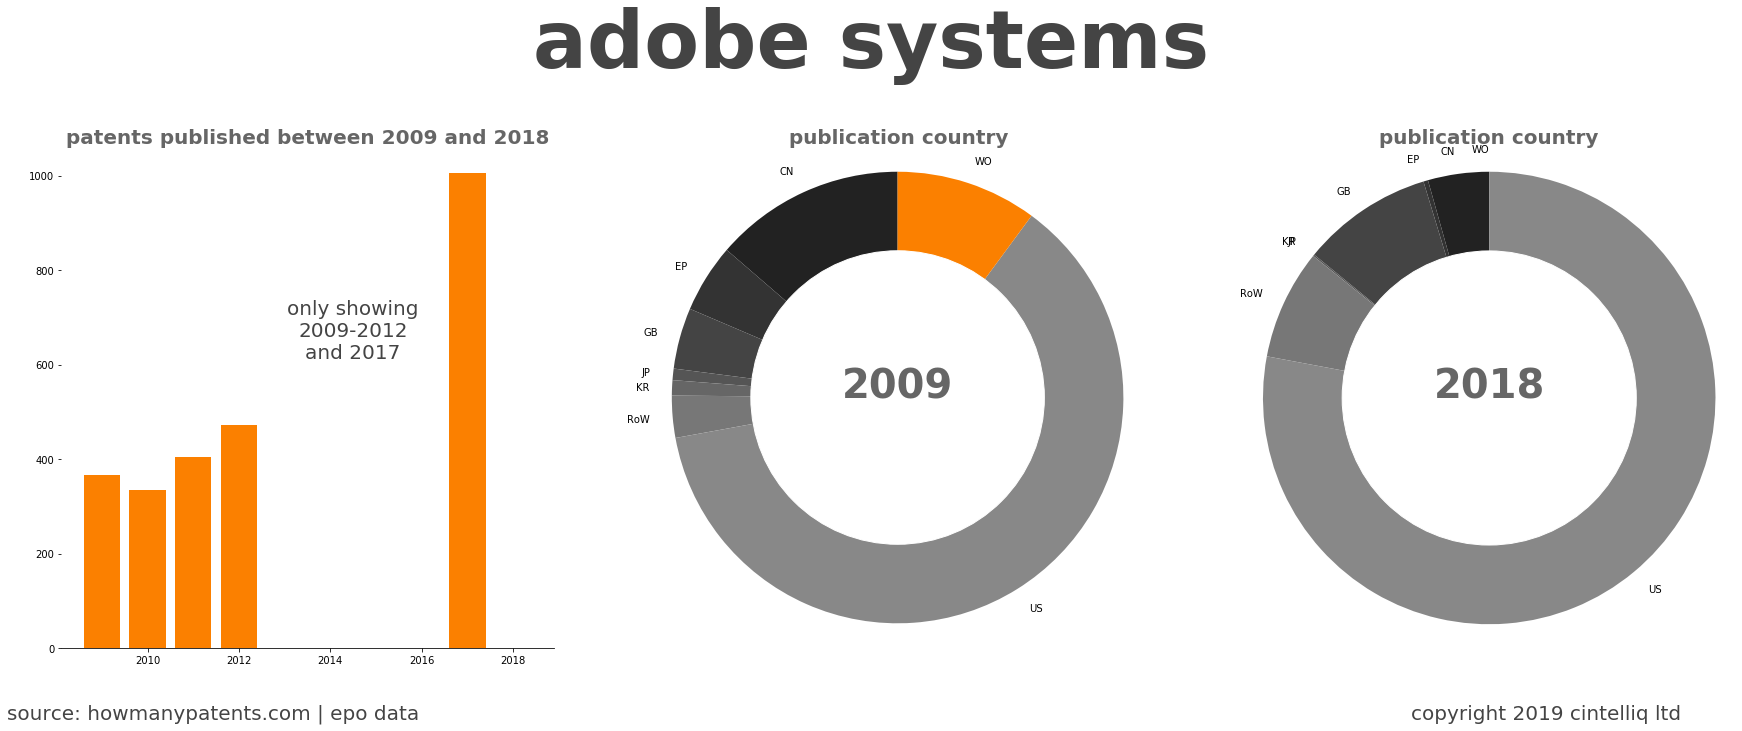 summary of patents for Adobe Systems